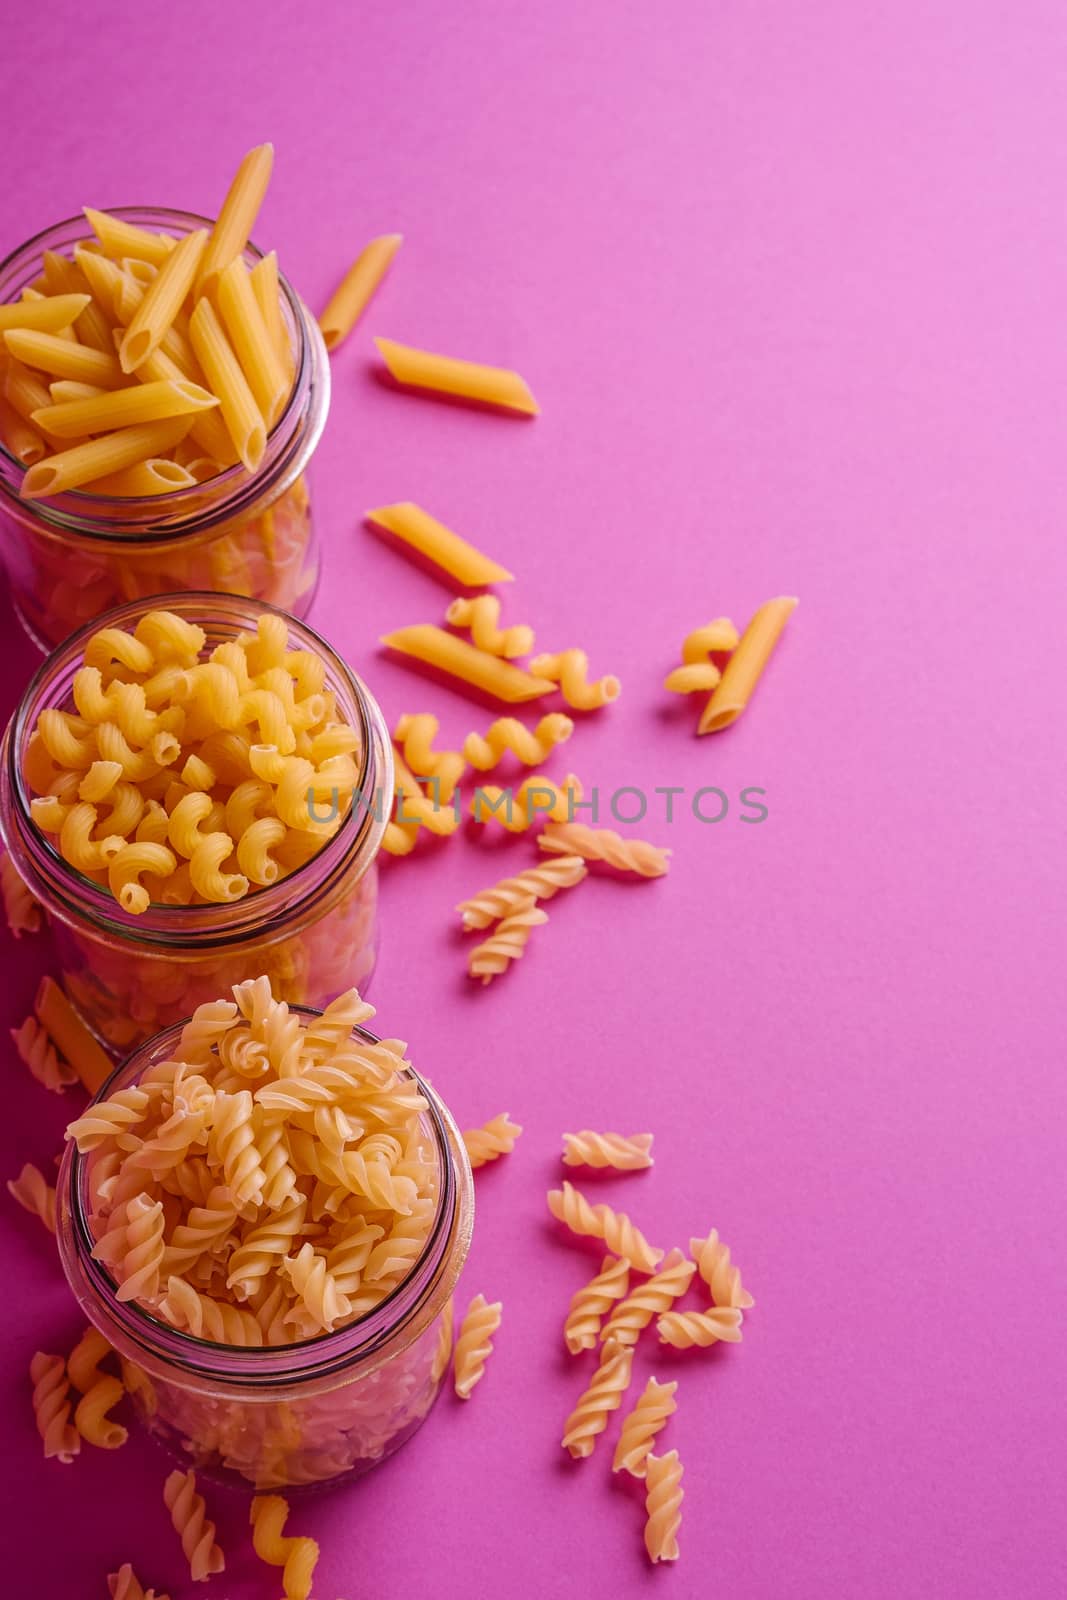 Three glass jars with variety of uncooked golden wheat pasta on minimal pink background, angle view